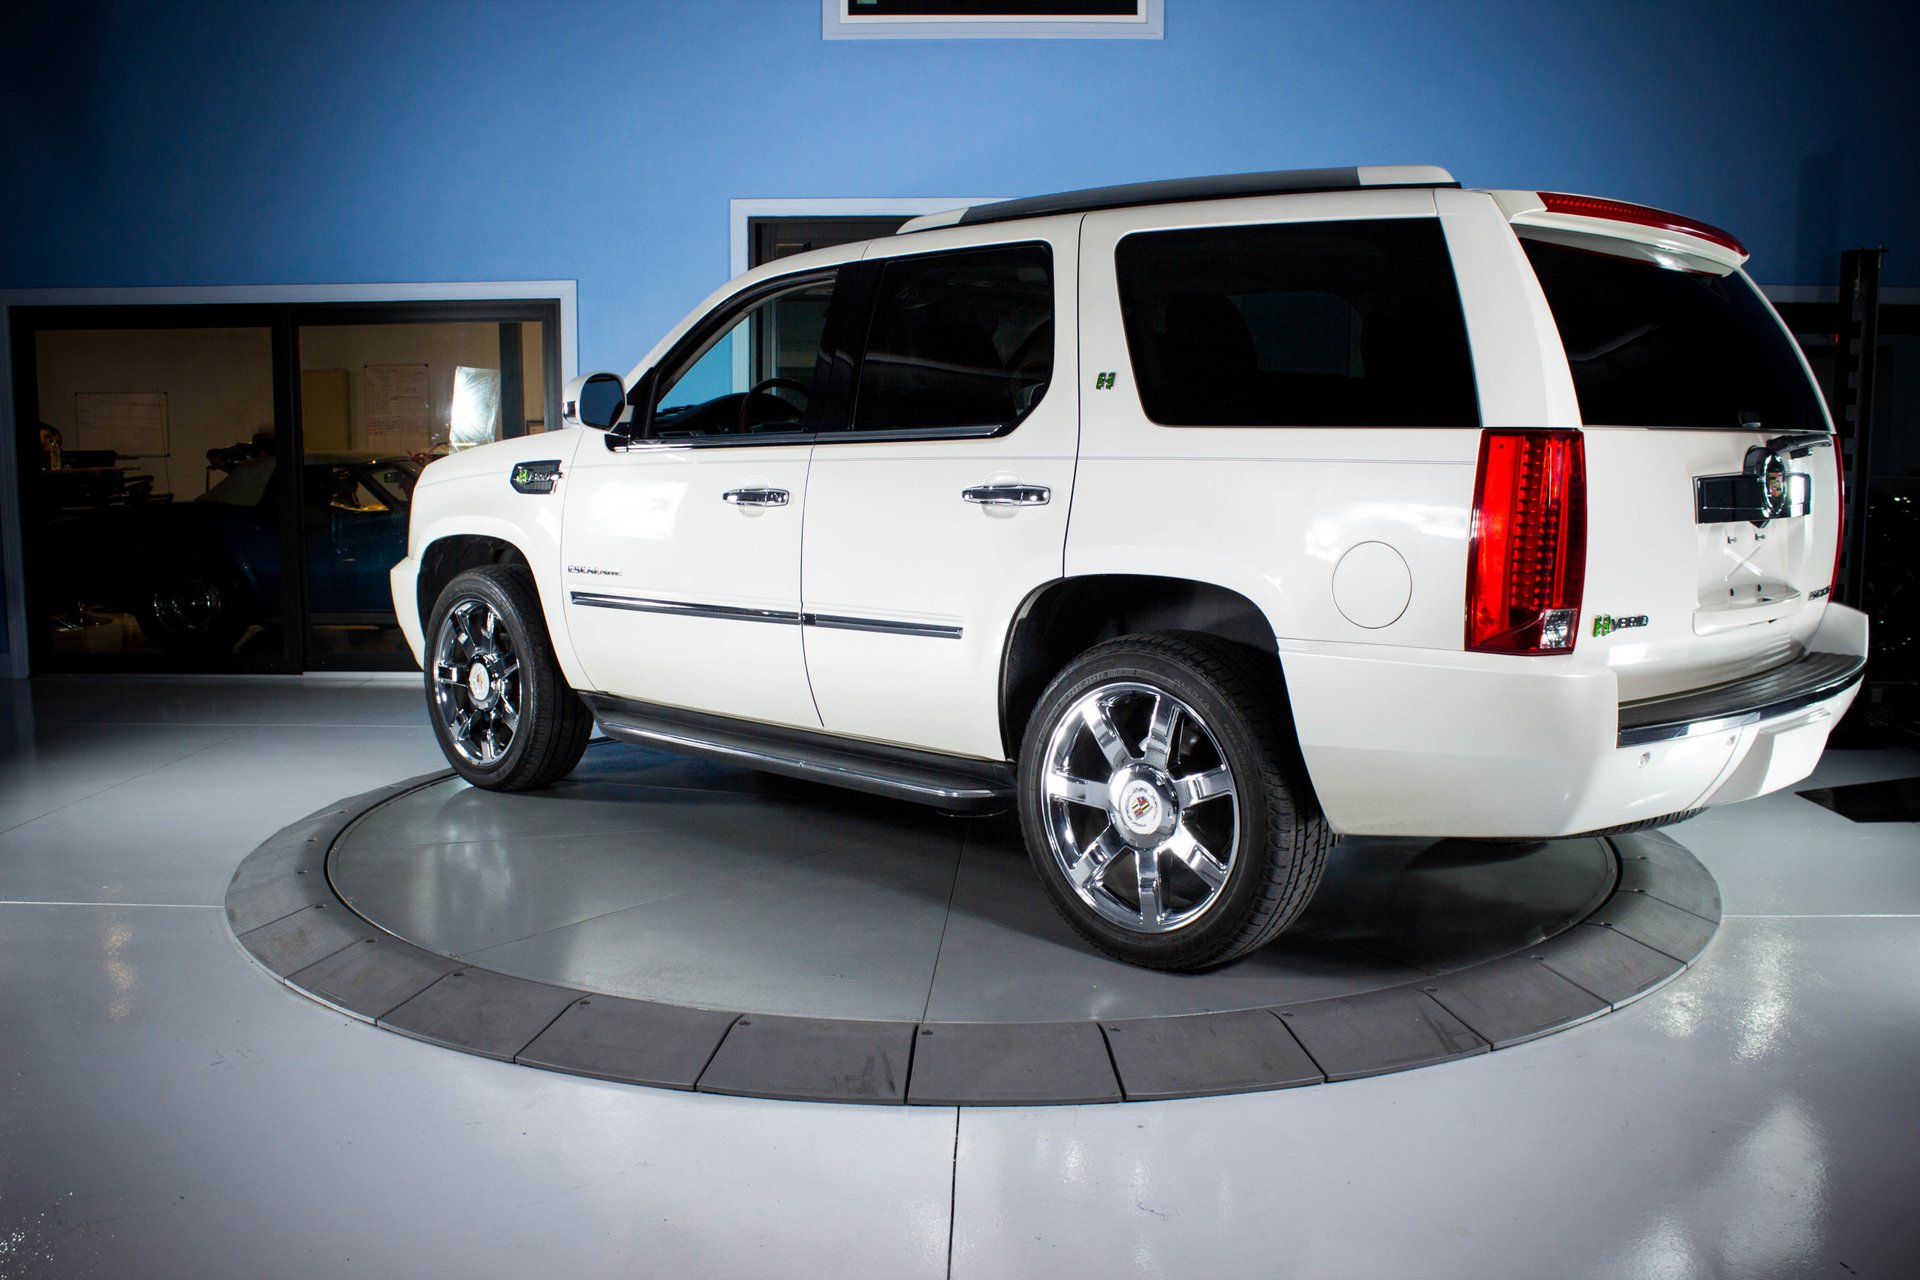 2013 Cadillac Escalade Hybrid | Classic Cars & Used Cars For Sale in Tampa,  FL